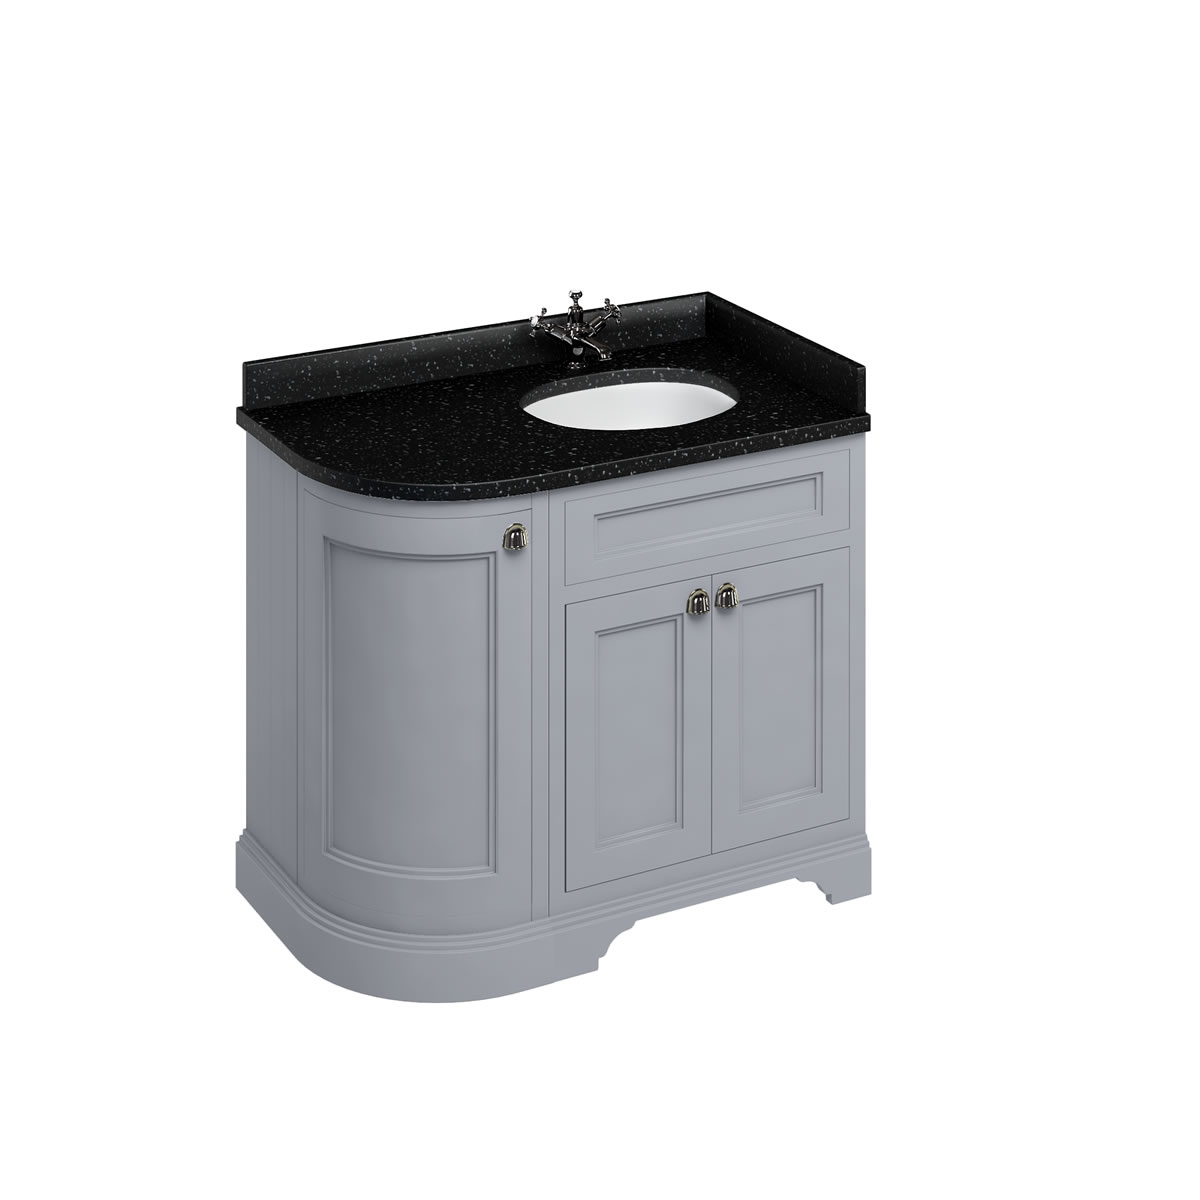 Freestanding 100 Curved Corner Vanity Unit Right Hand - Classic Grey and Minerva black granite worktop with integrated white basins 